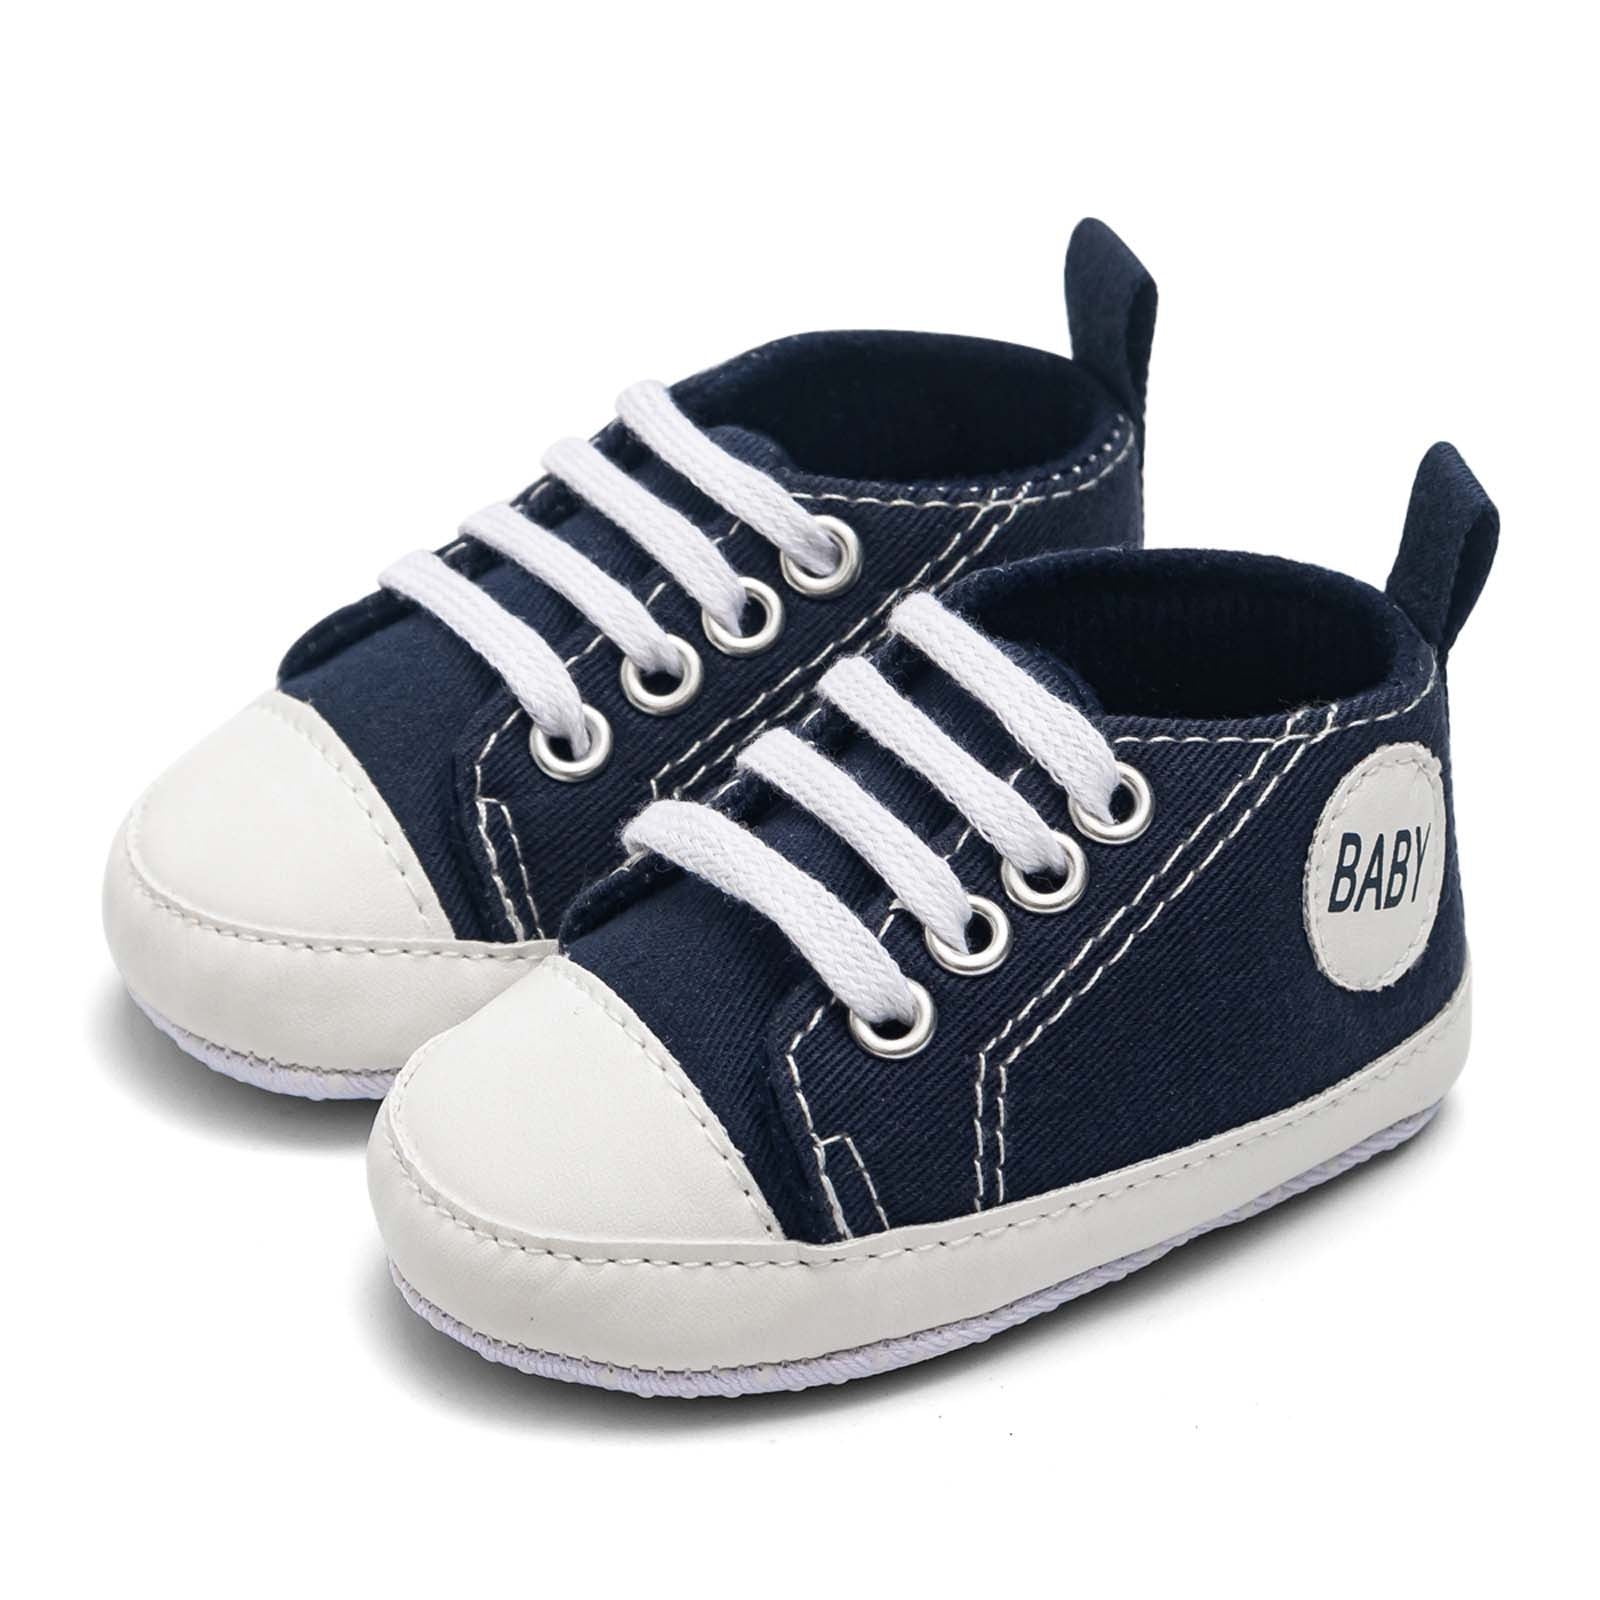 Jeans Fabric Shoes For Girls - Evilato